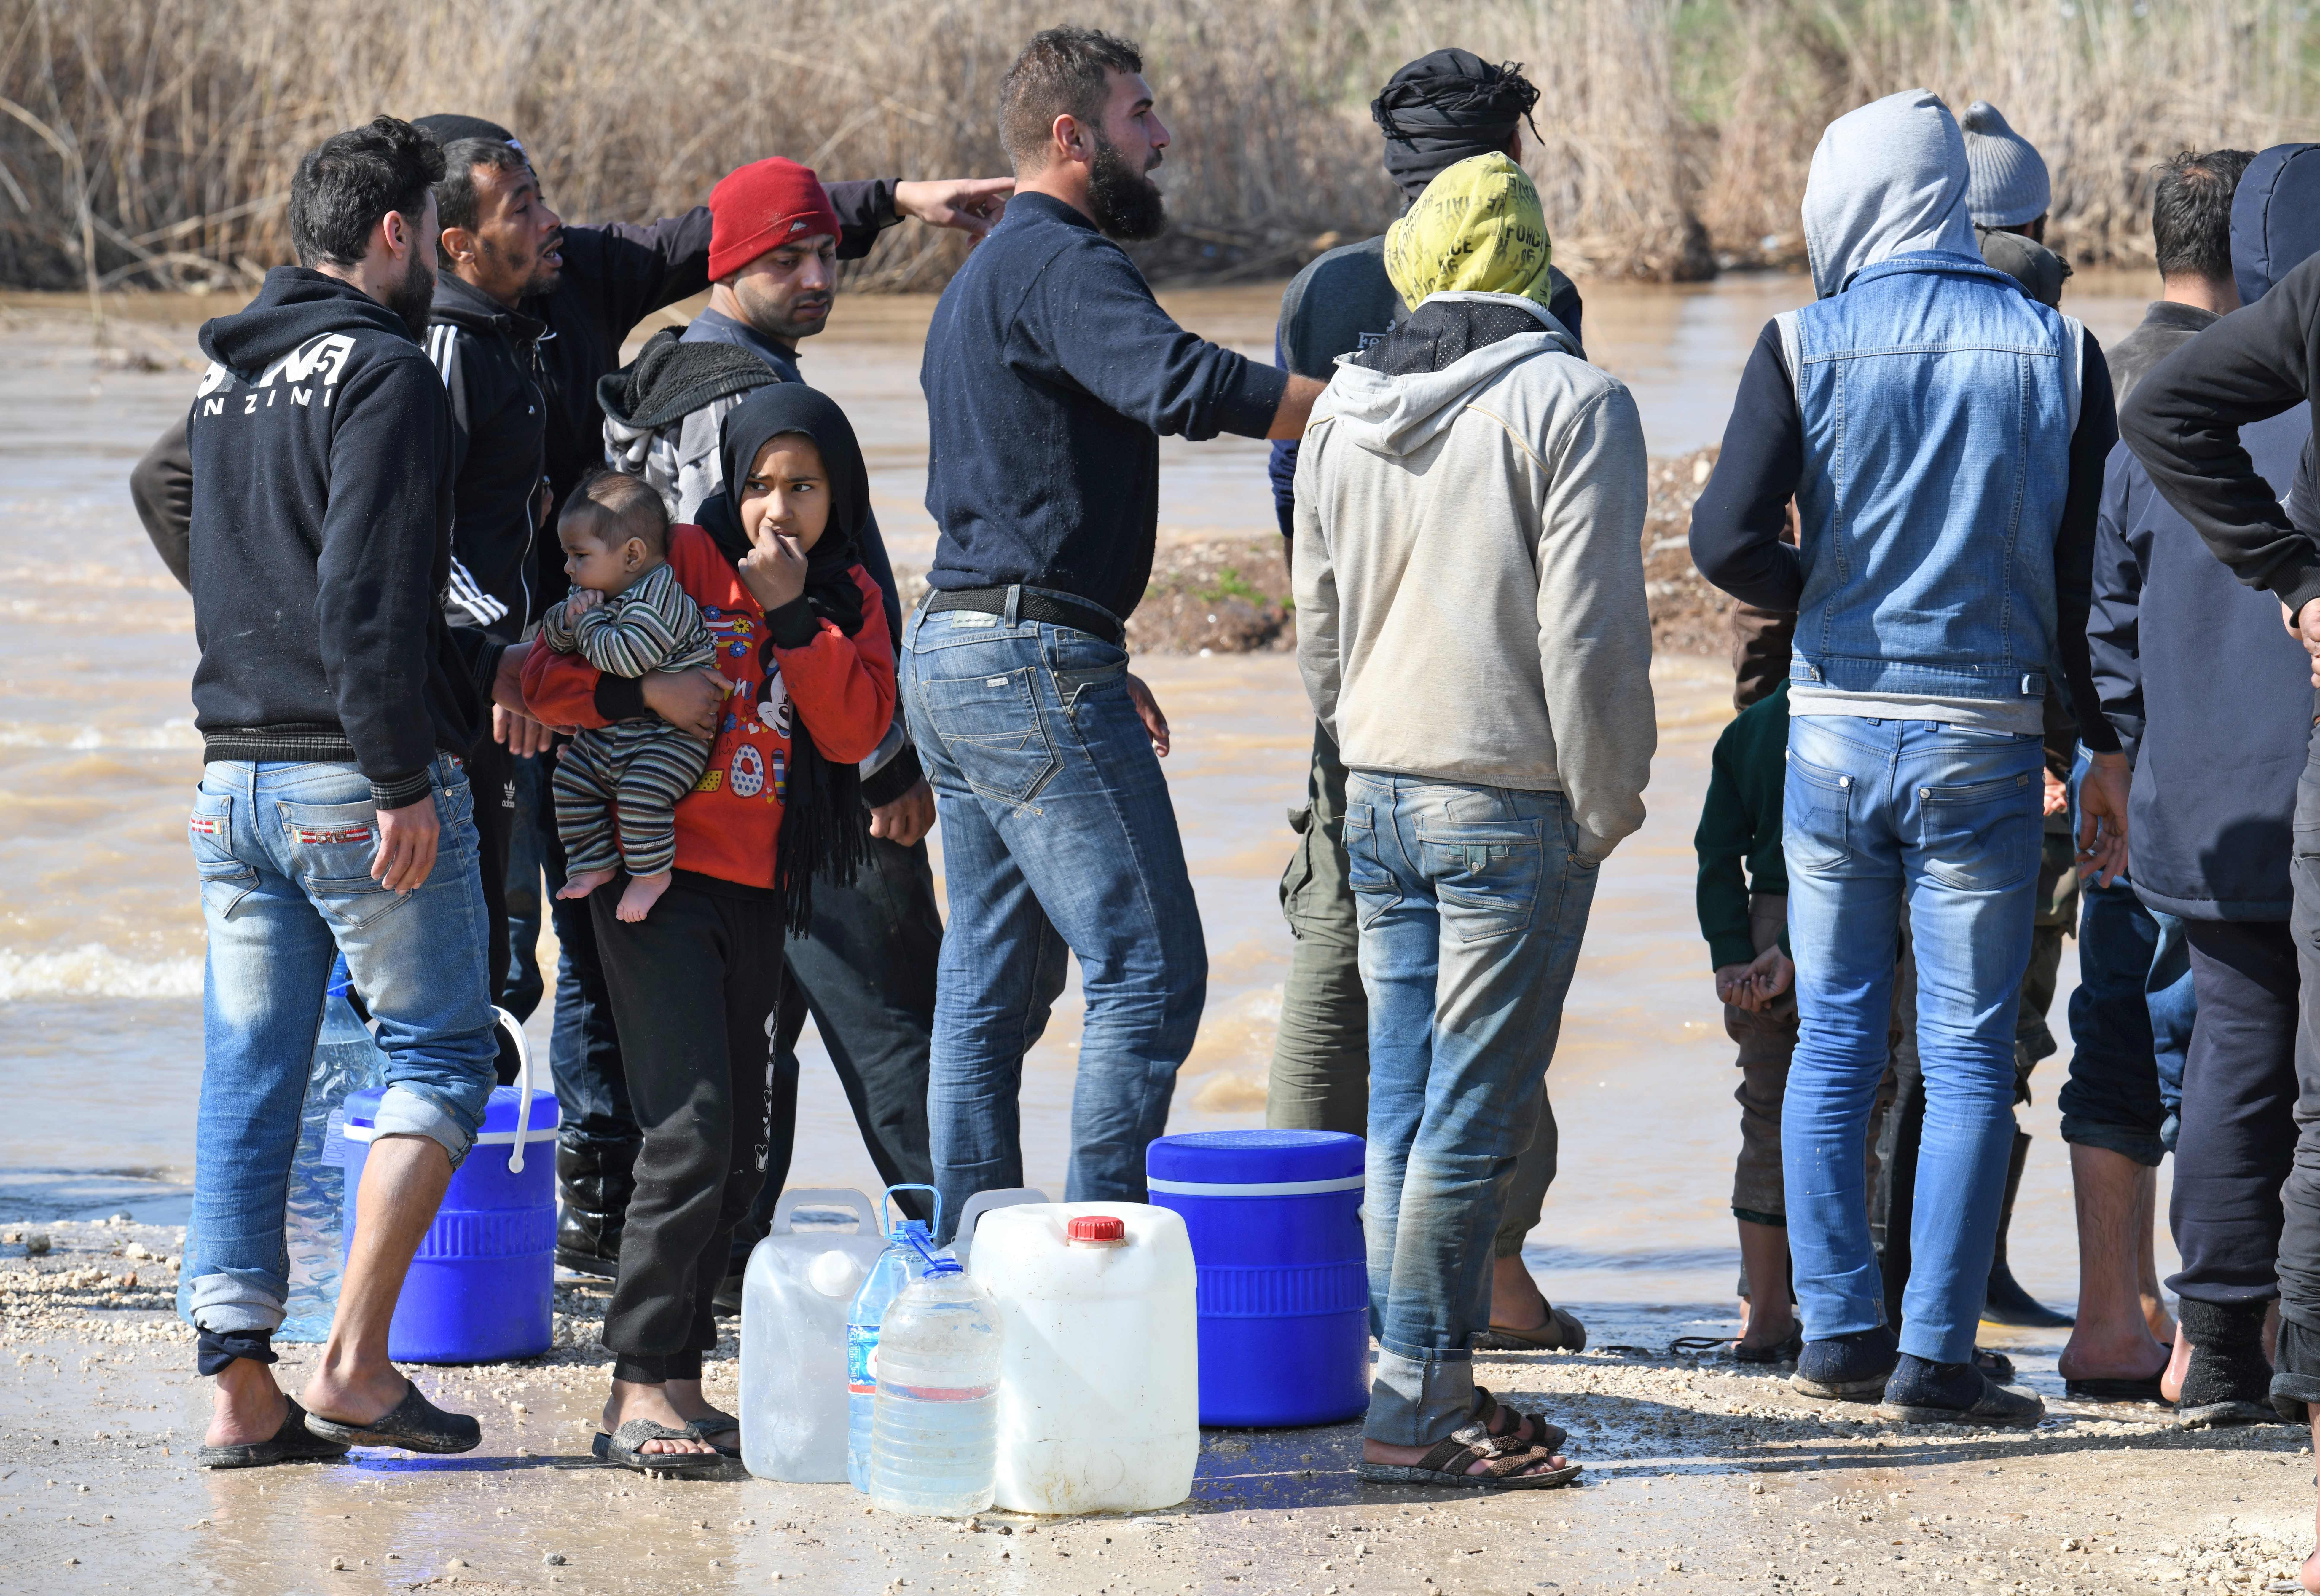 Syrian displaced people wait to carry water canisters in the flooded Deir al-Ballut refugee camp in Afrin's countryside